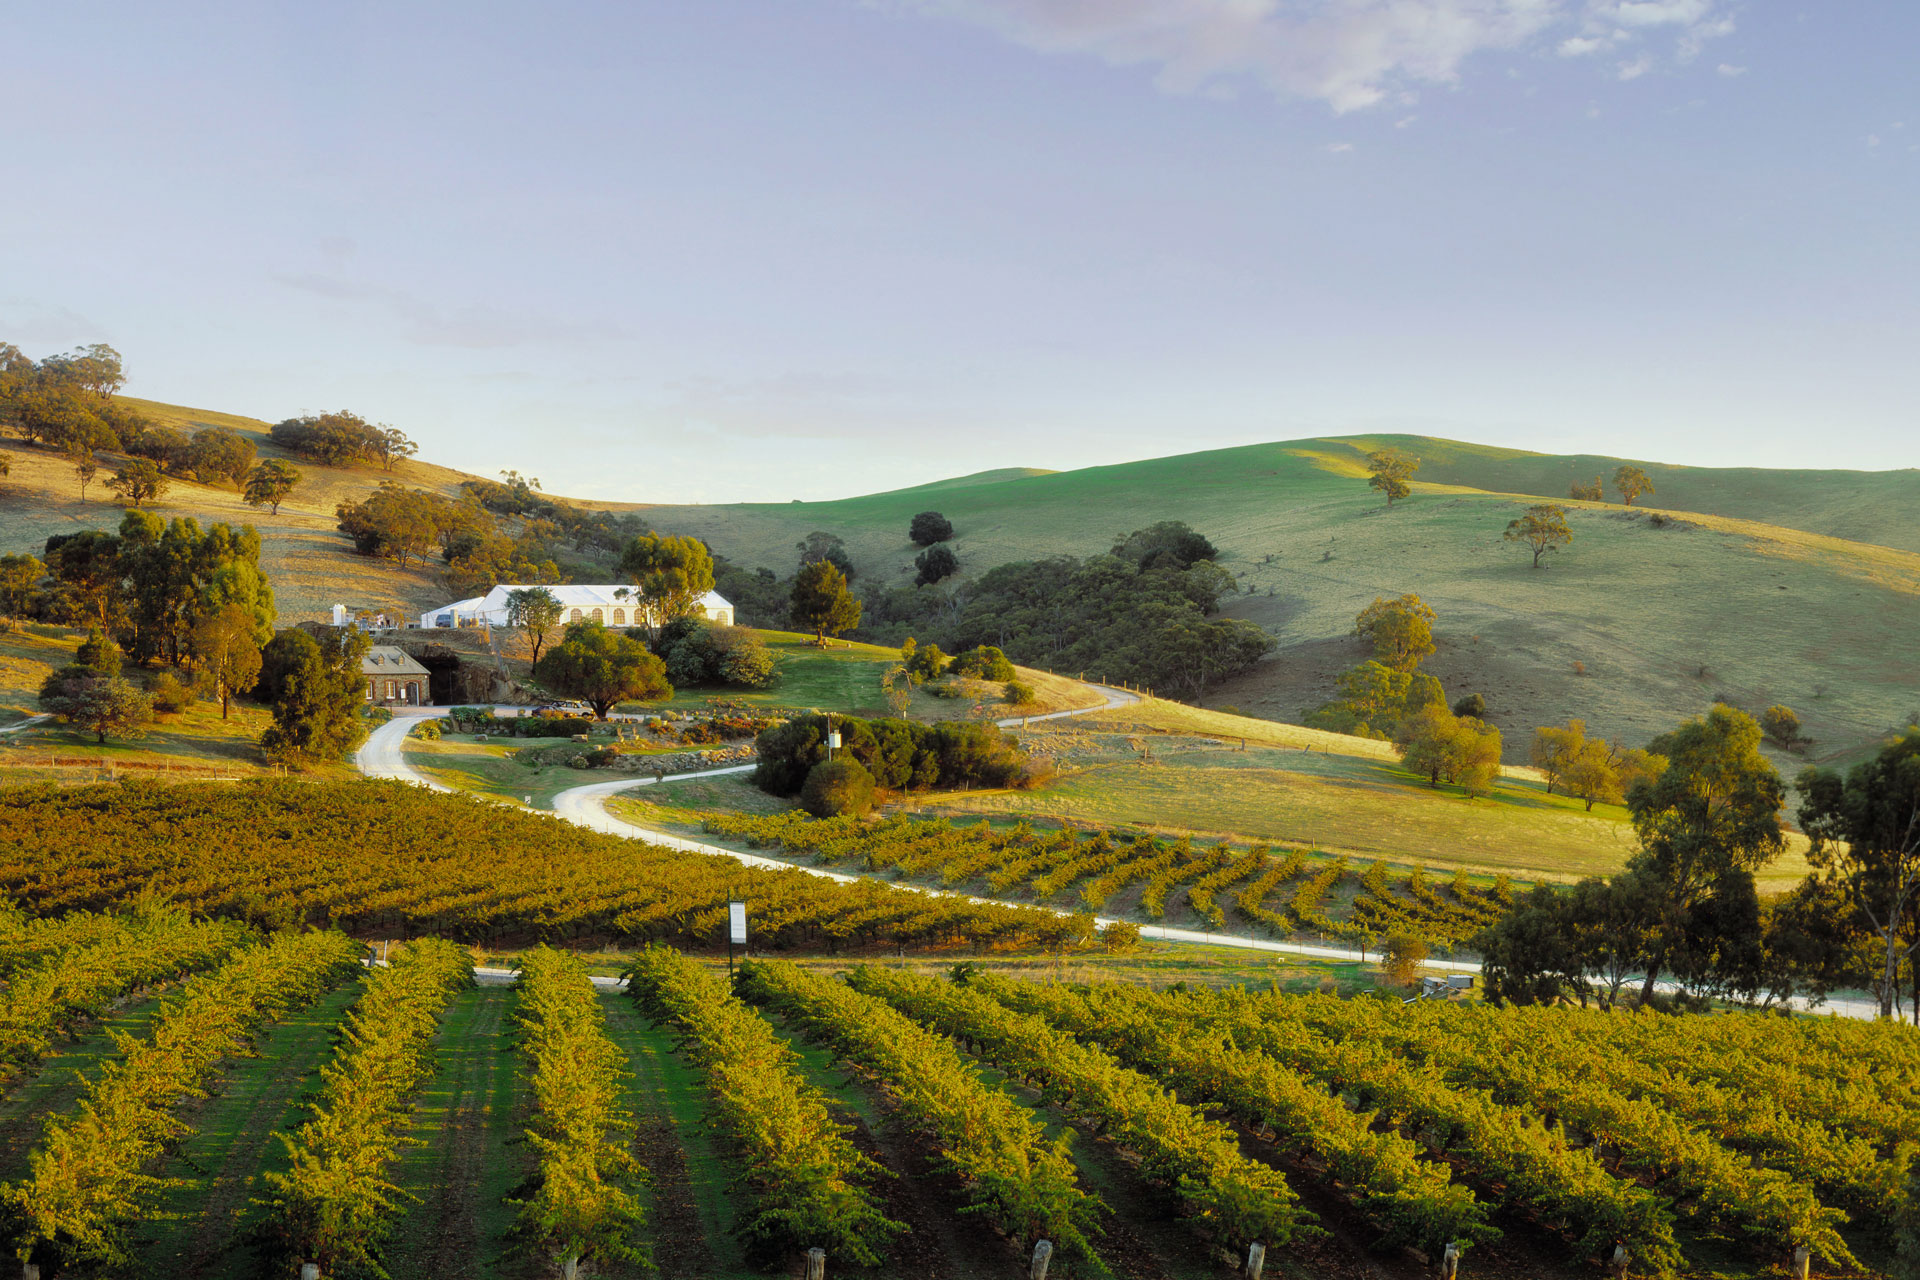 Adelaide's Famous Tourist Attractions - Barossa Valley Wineries